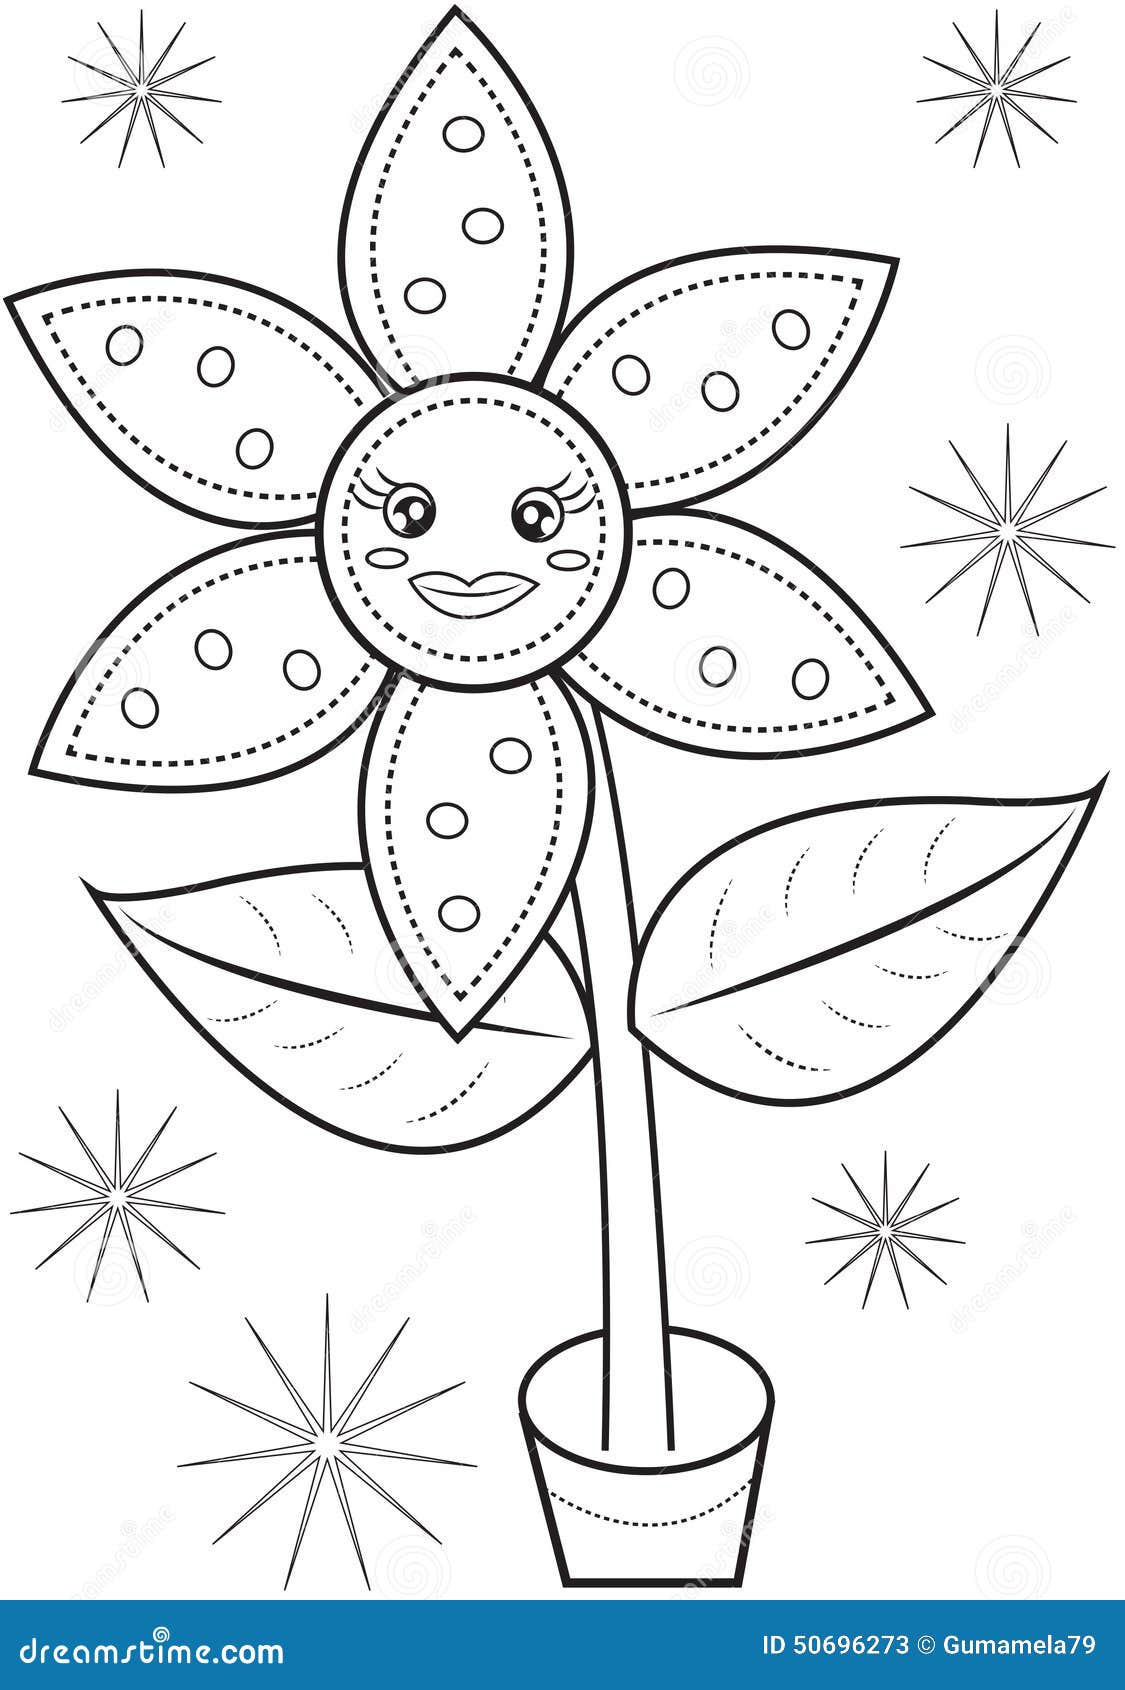 Flower Coloring Page Stock Illustrations – 55,759 Flower Coloring ...